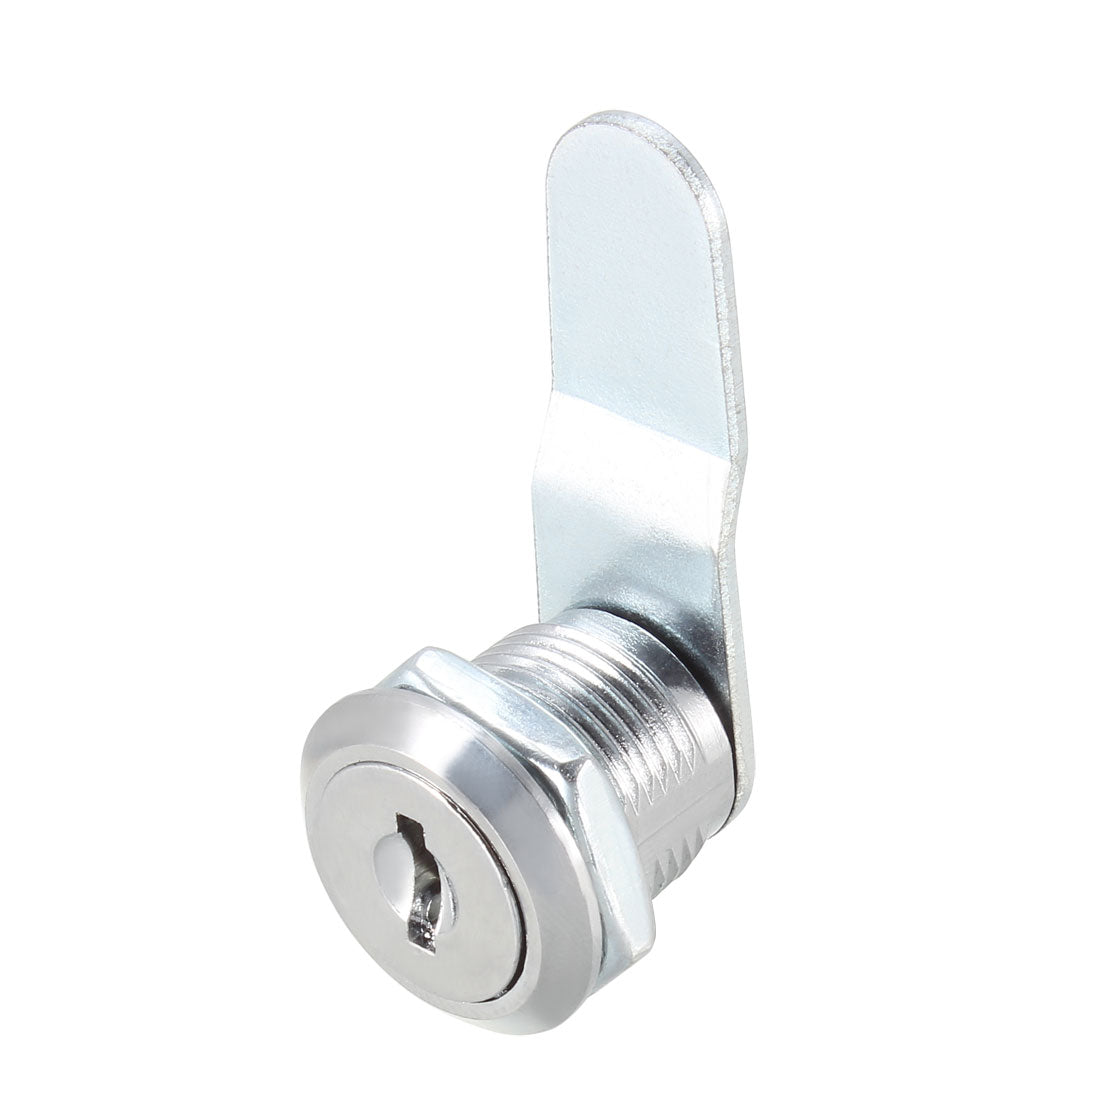 Uxcell Uxcell Cam Locks 30mm Cylinder Length Fit on Max 7/8-inch Panel Keyed Different 2Pcs